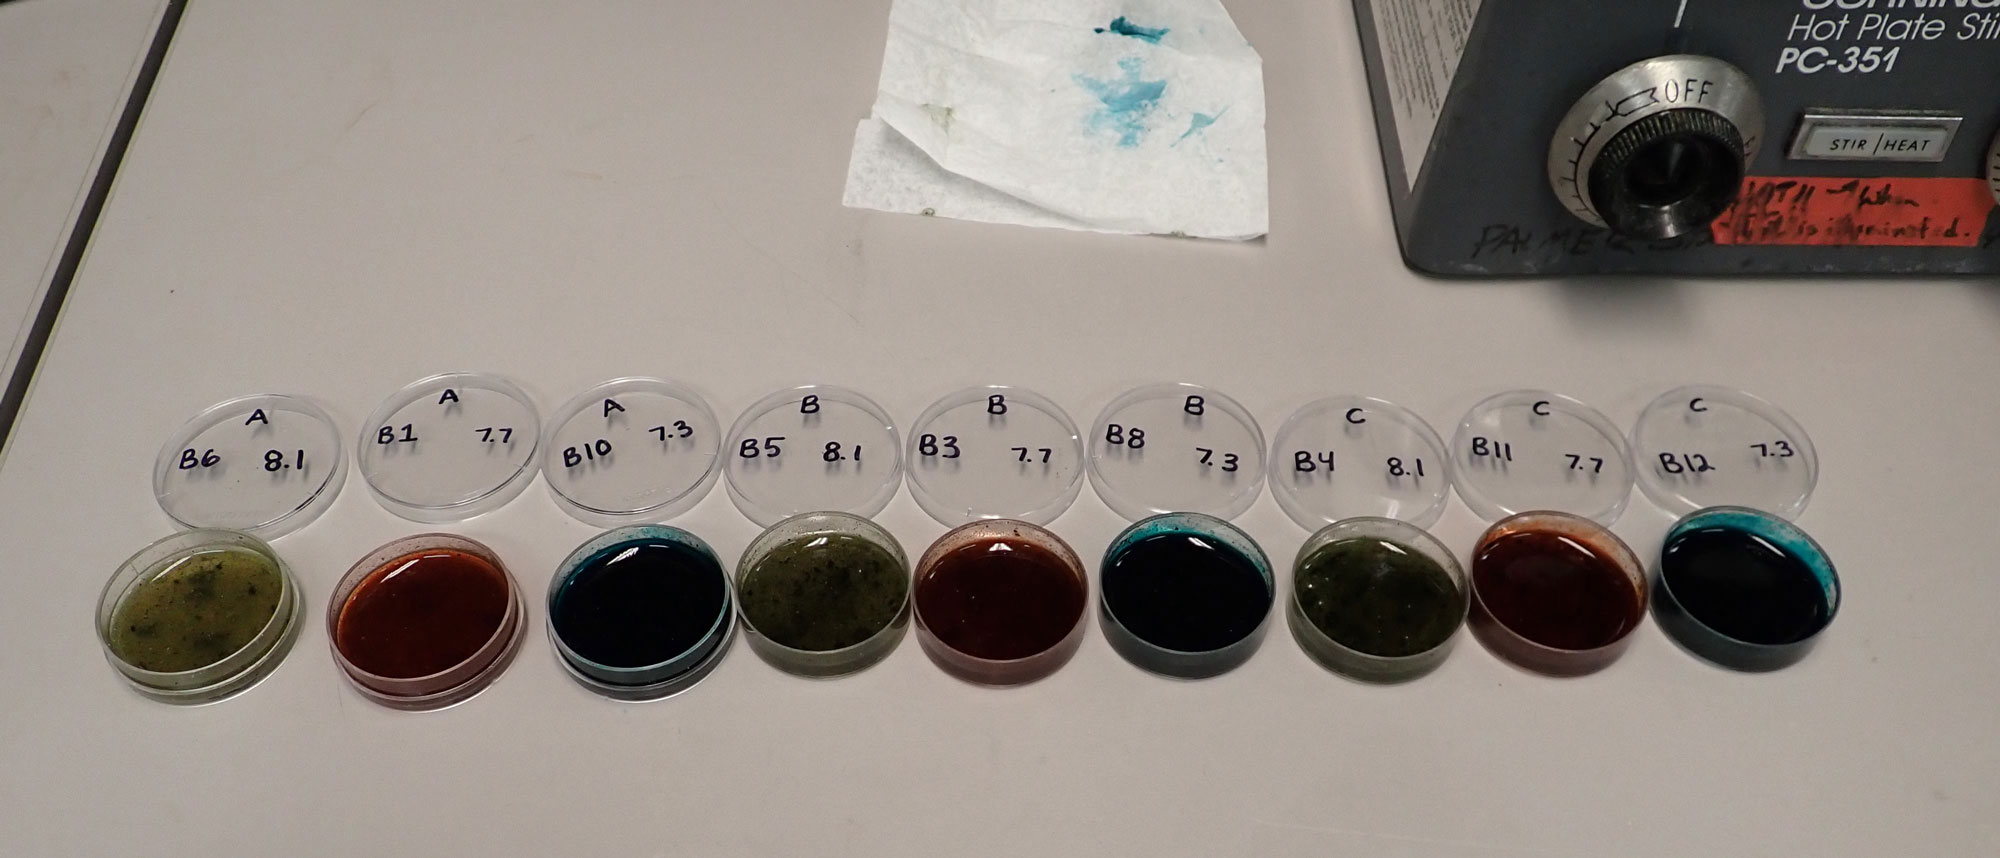 Three sets of small petri dishes labeled A,B, or C with green, red, or blue filling